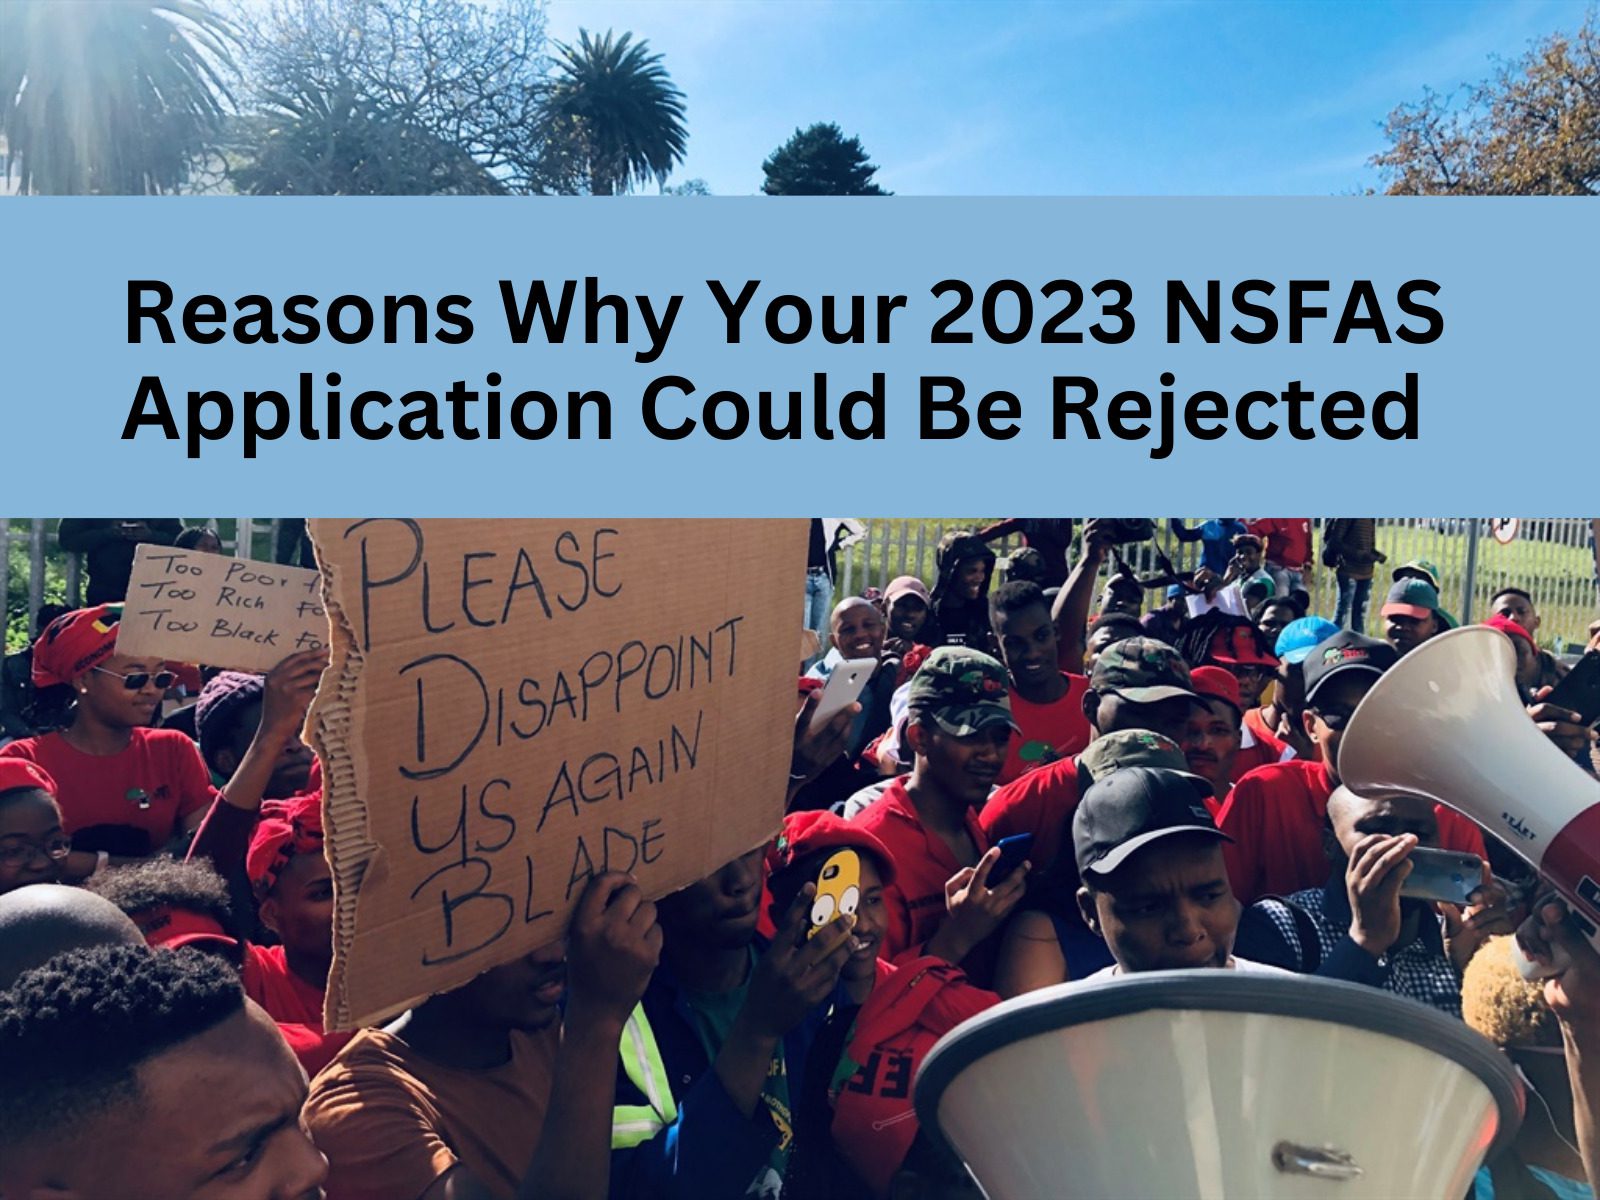 Reasons Why Your 2023 NSFAS Application Could Be Rejected